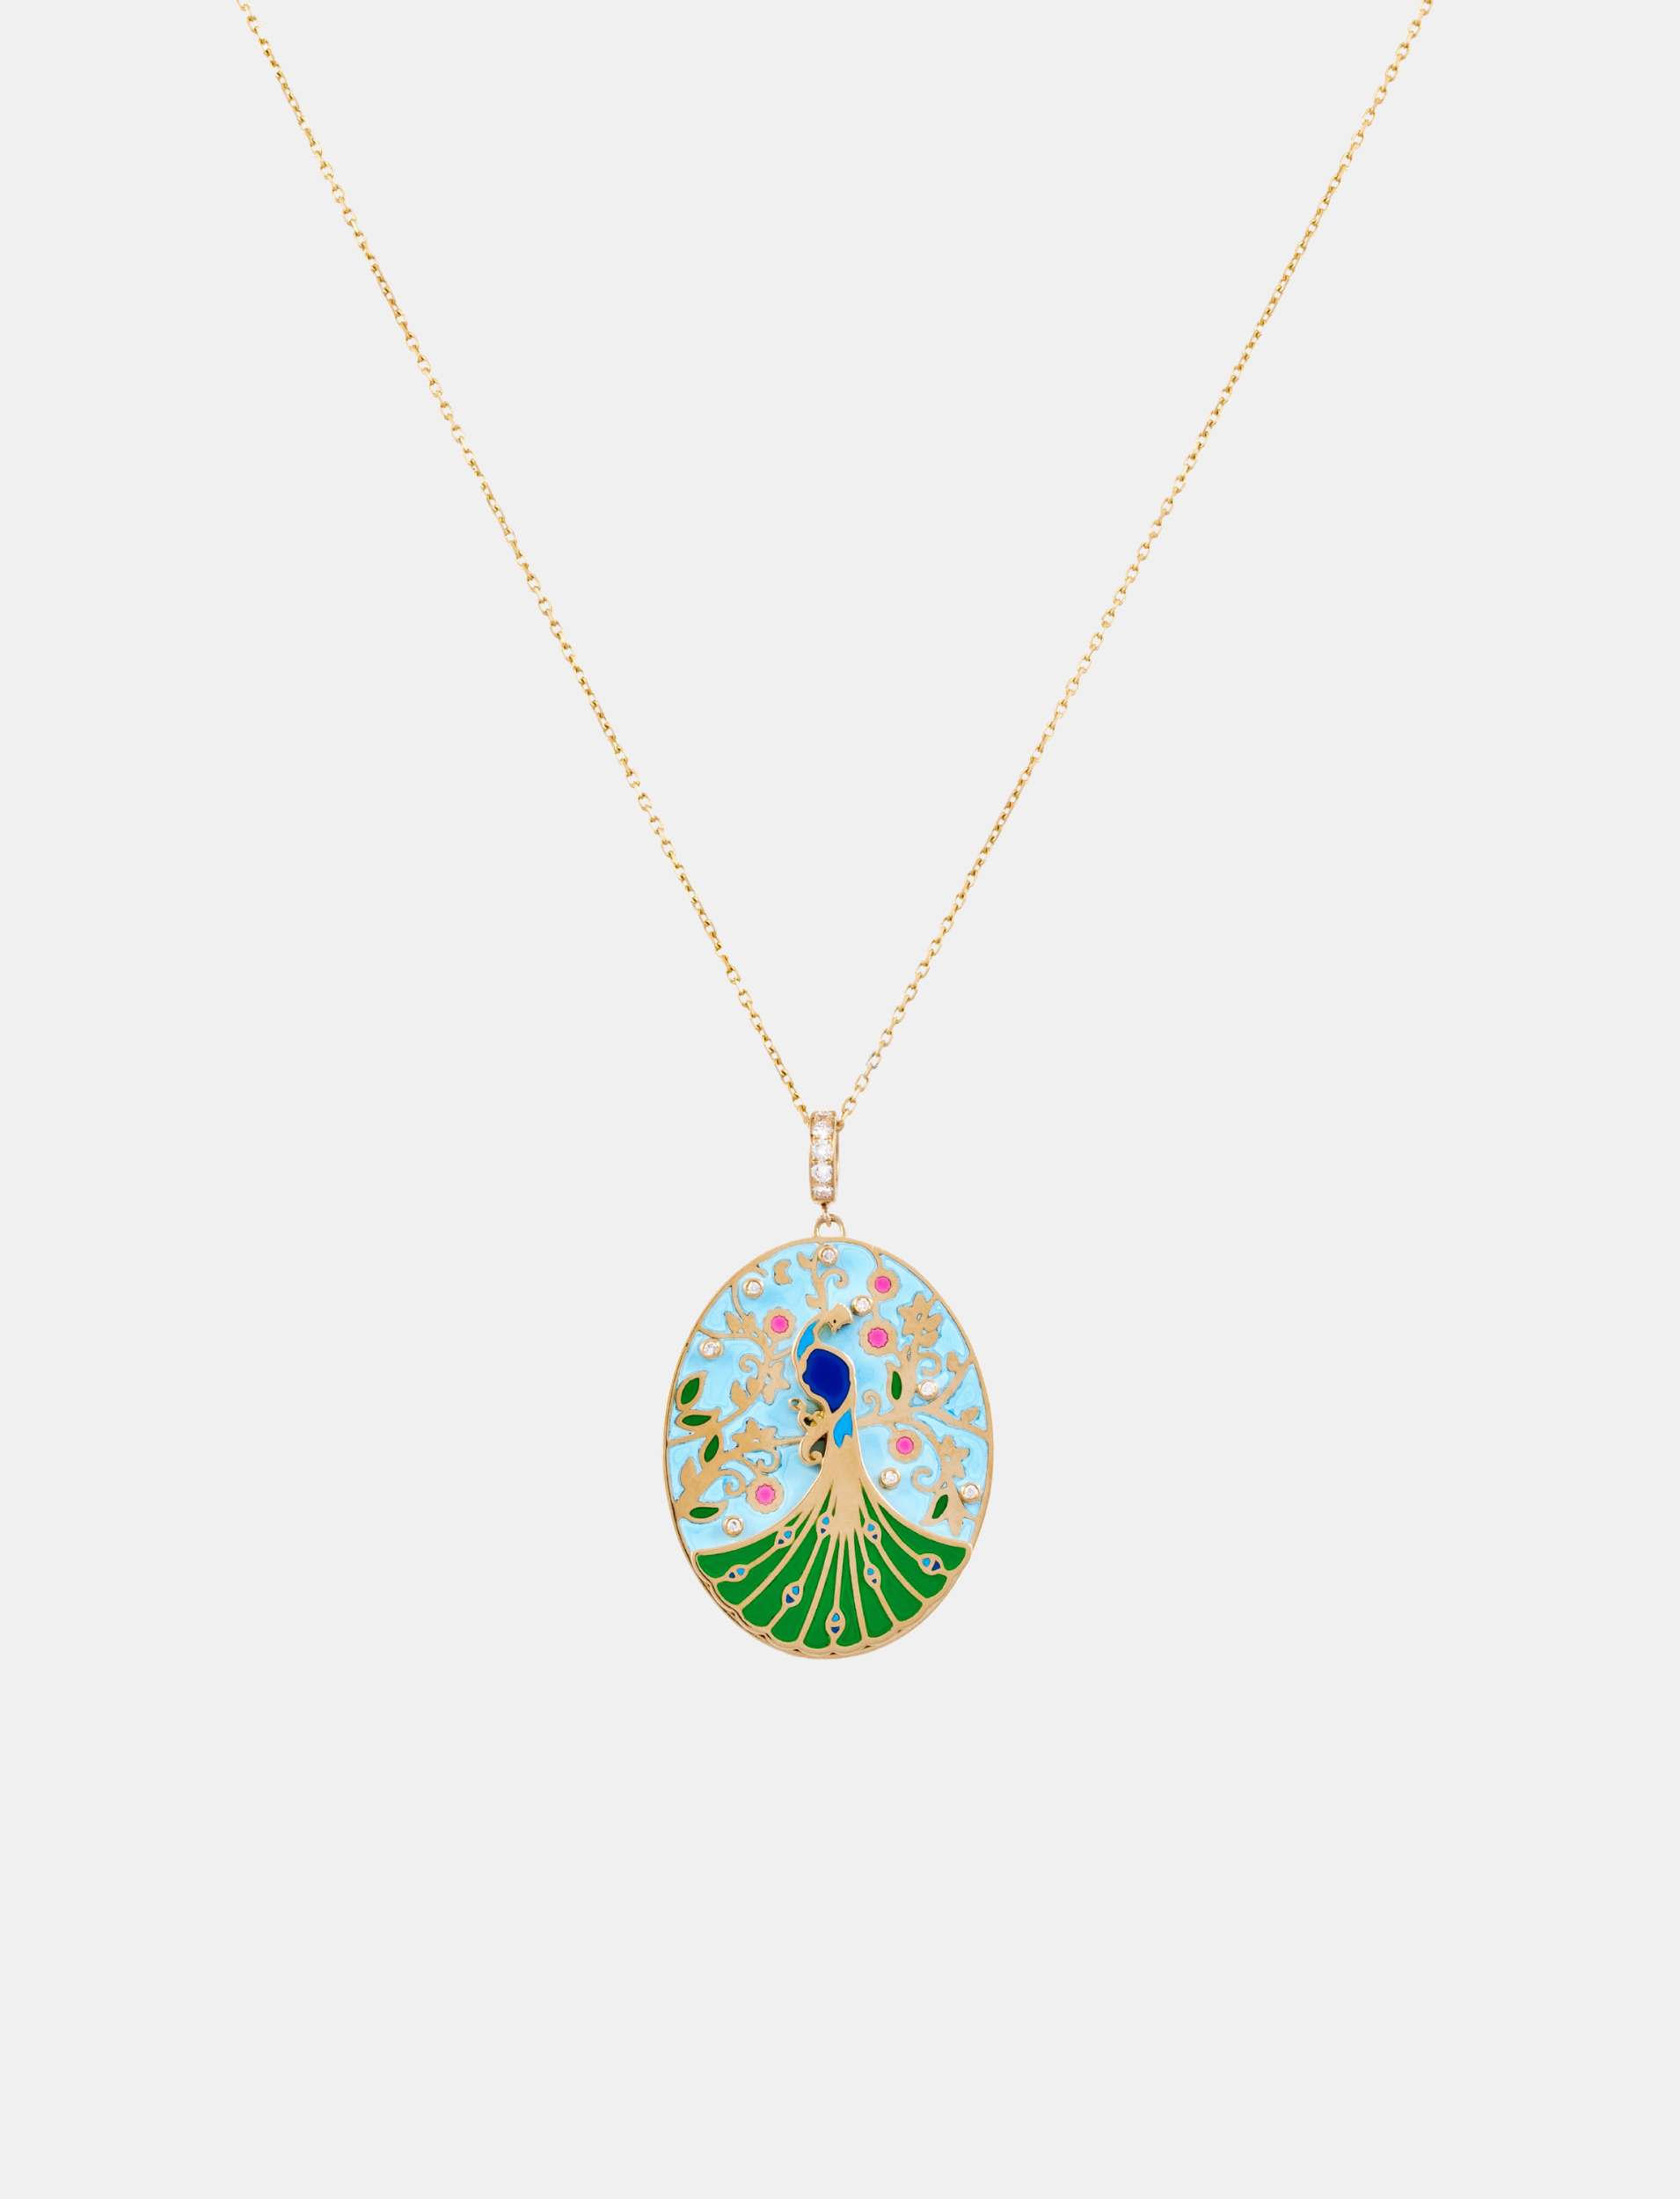 The Wise Peacock Pendant - Big